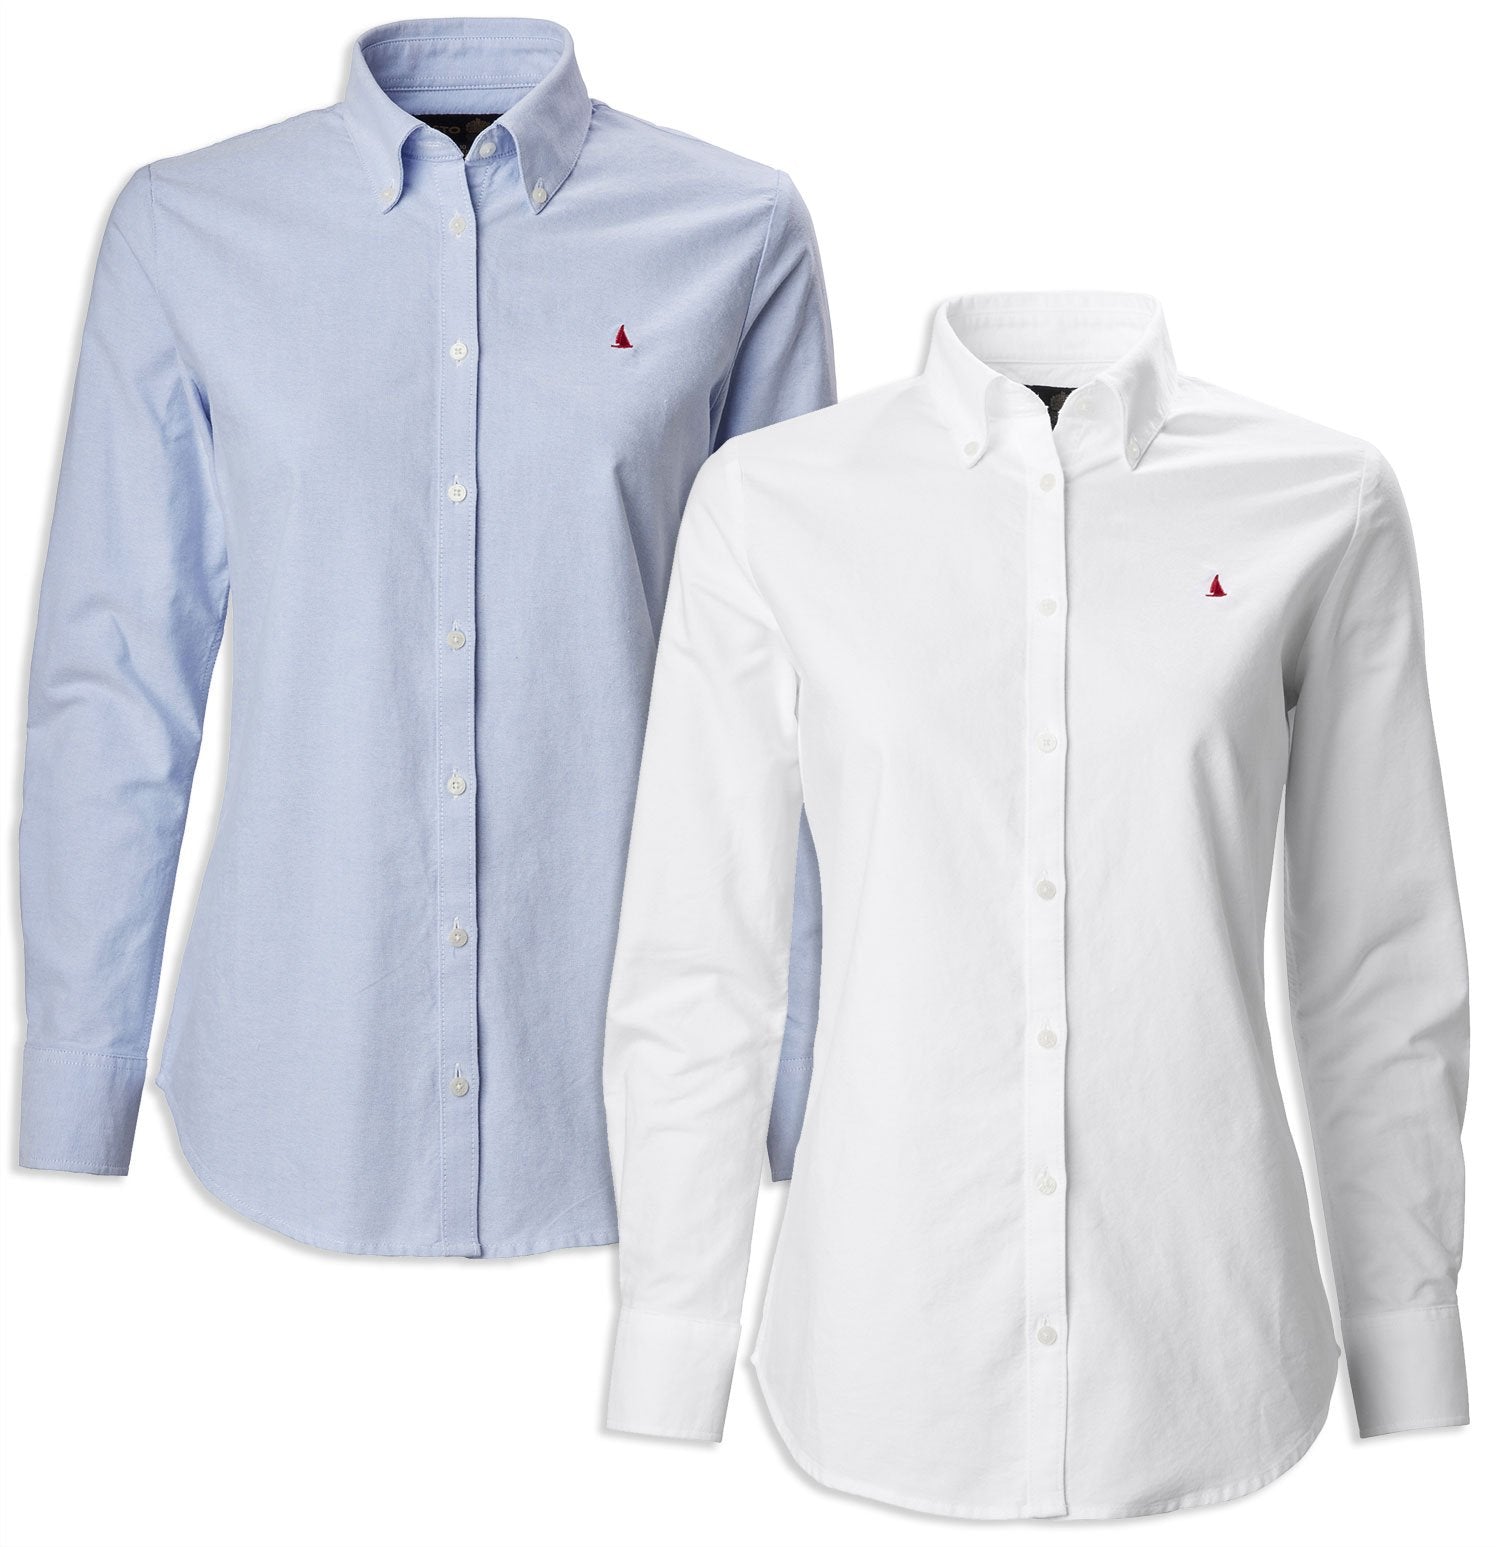 Musto Ladies Oxford Long Sleeve Shirt | Bright White, Pale Blue 